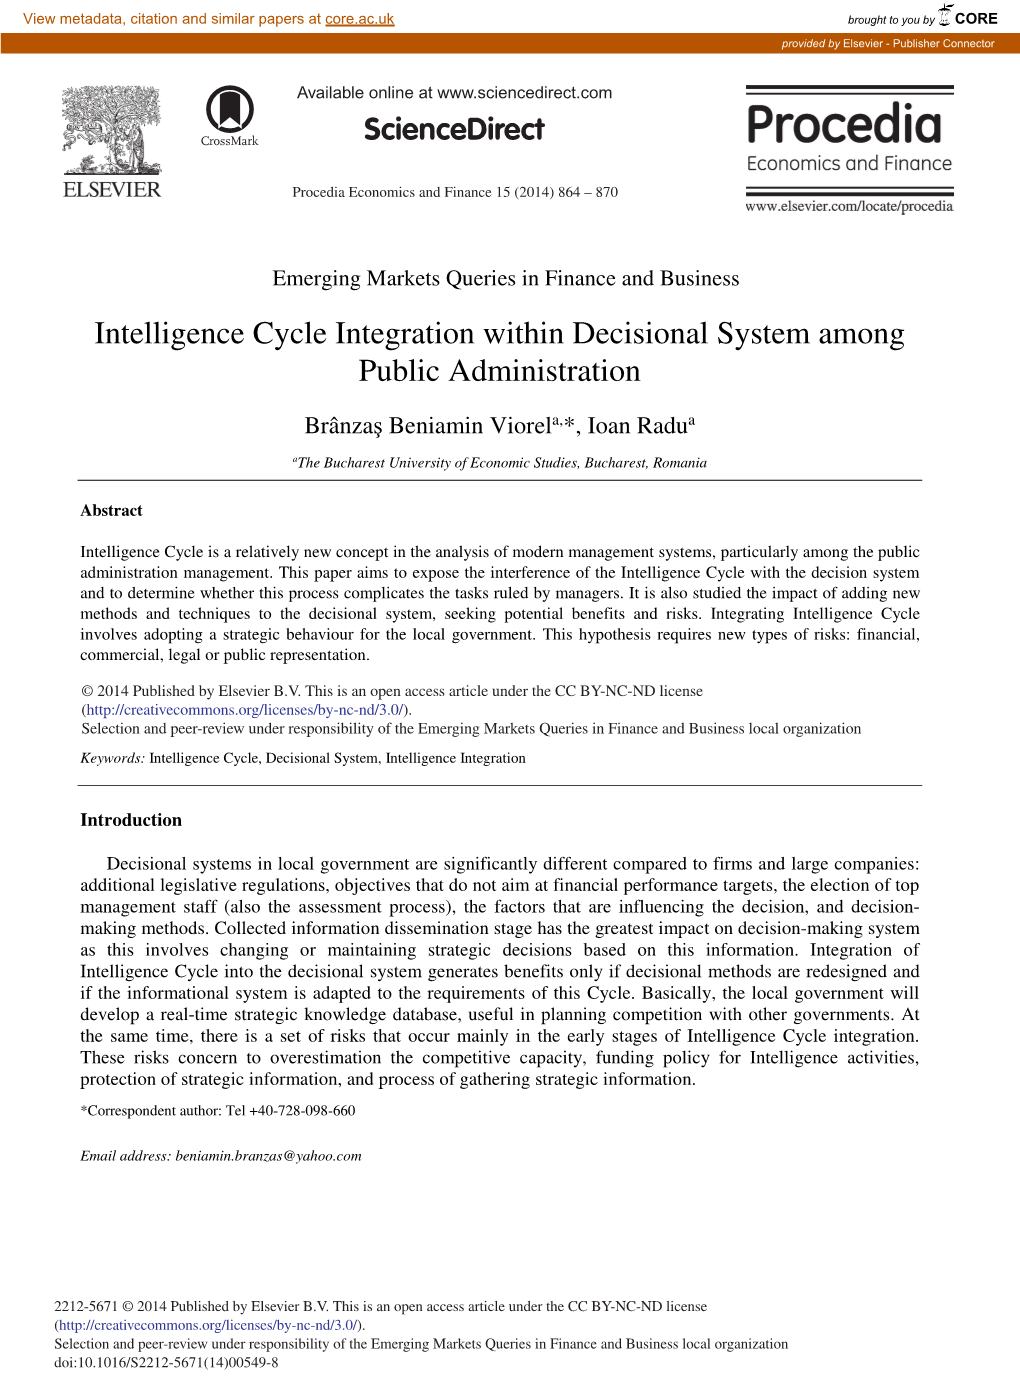 Intelligence Cycle Integration Within Decisional System Among Public Administration